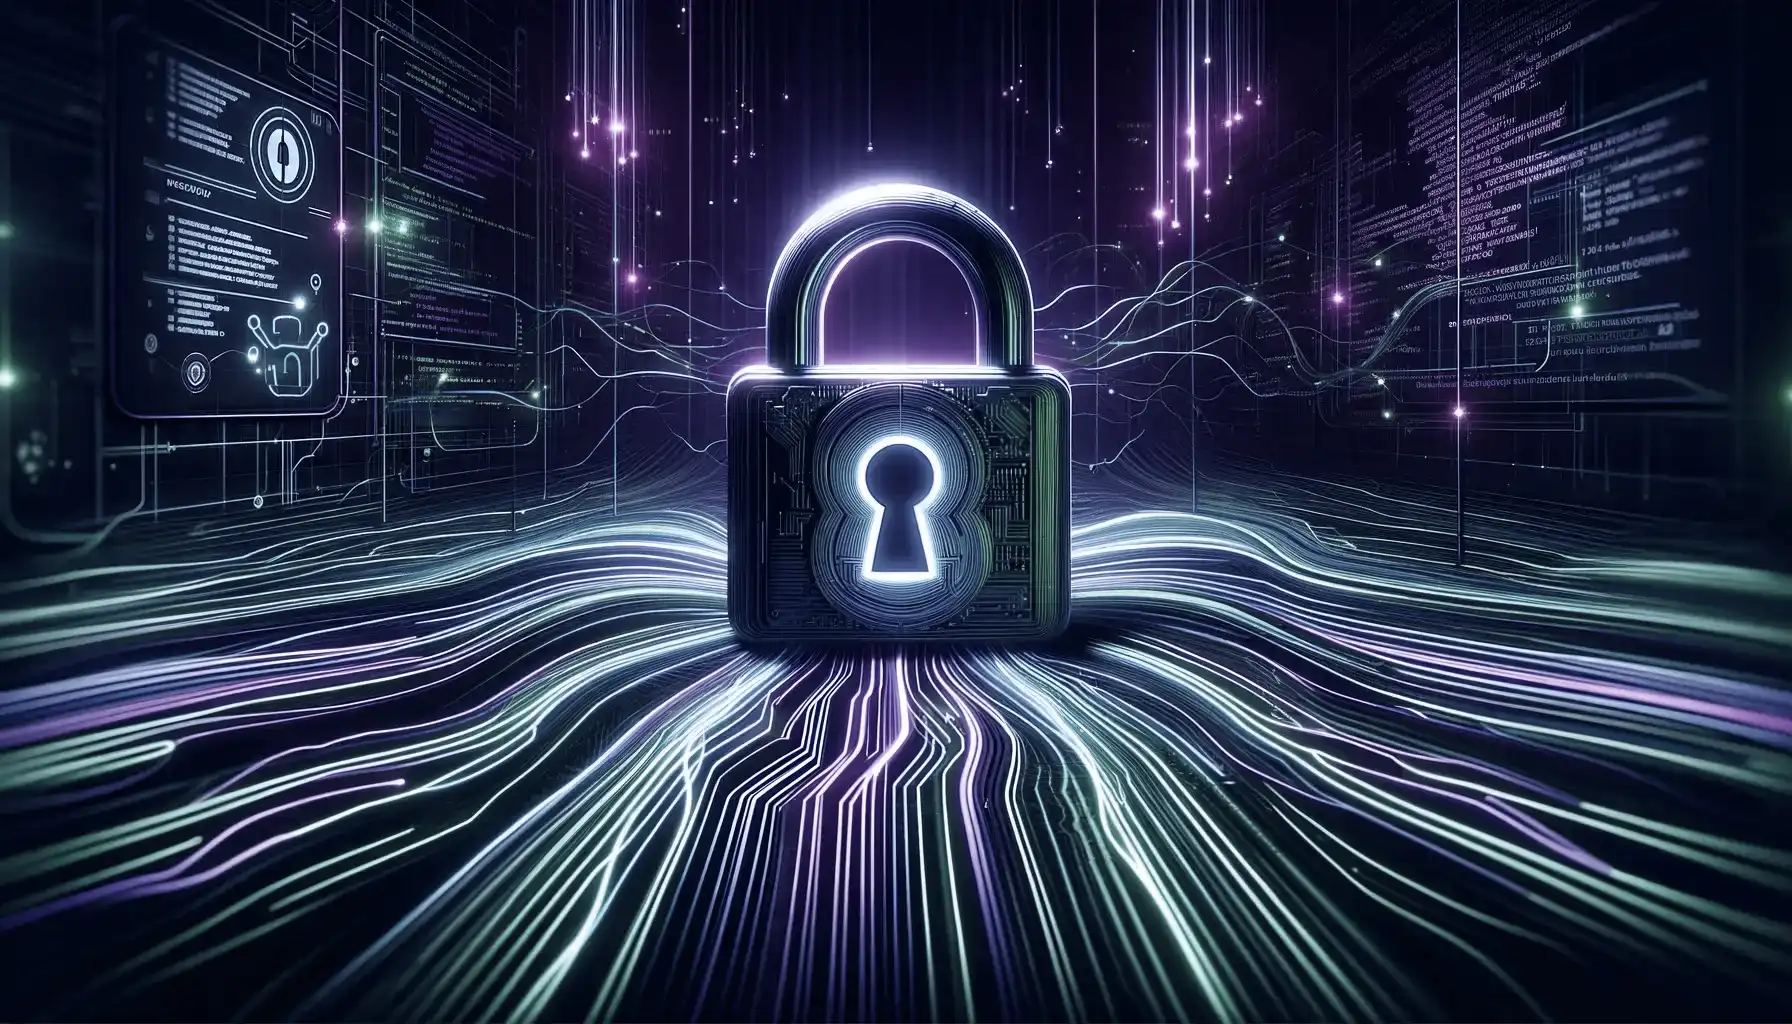 This 16x9 image vividly illustrates the concept of secure application development, dominated by shades of purple and green neon lights. At the center is a large, stylized lock, symbolizing the robust security measures integrated into app development. Encircling this lock are dynamic streams of digital data and code, represented by flowing lines in neon purple and green, converging towards the lock. This visual metaphor underscores the commitment to data protection and privacy in application development. The background is infused with elements of a digital cybersecurity environment, including encrypted code patterns and digital interfaces. The overall composition effectively conveys the importance of permissions, information privacy protection, and stringent security checks in the process of creating enterprise applications, along with the practice of conducting regular application vulnerability tests to ensure server security.